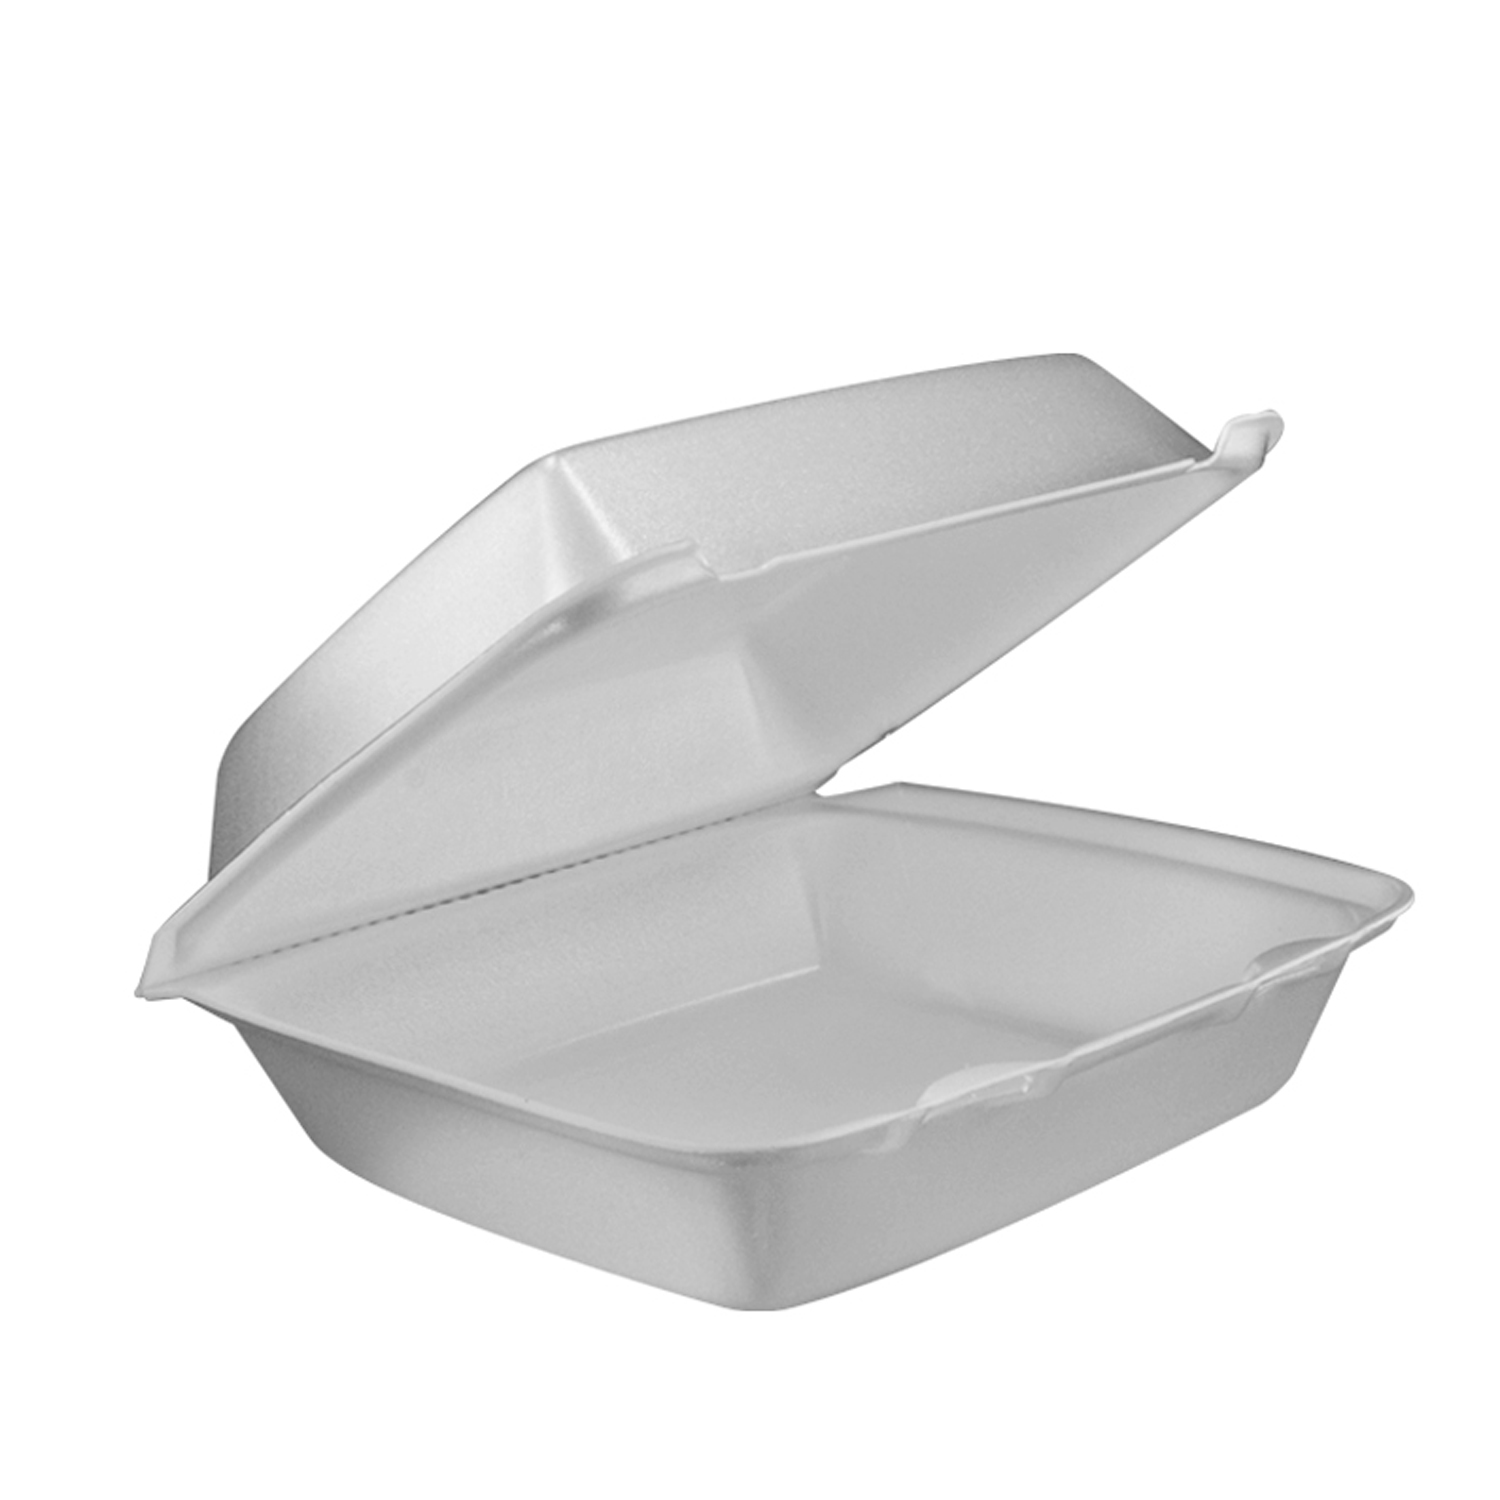 MEDIUM 1 COMPARTMENT HINGE TRAY(REMOVABLE LID) 200